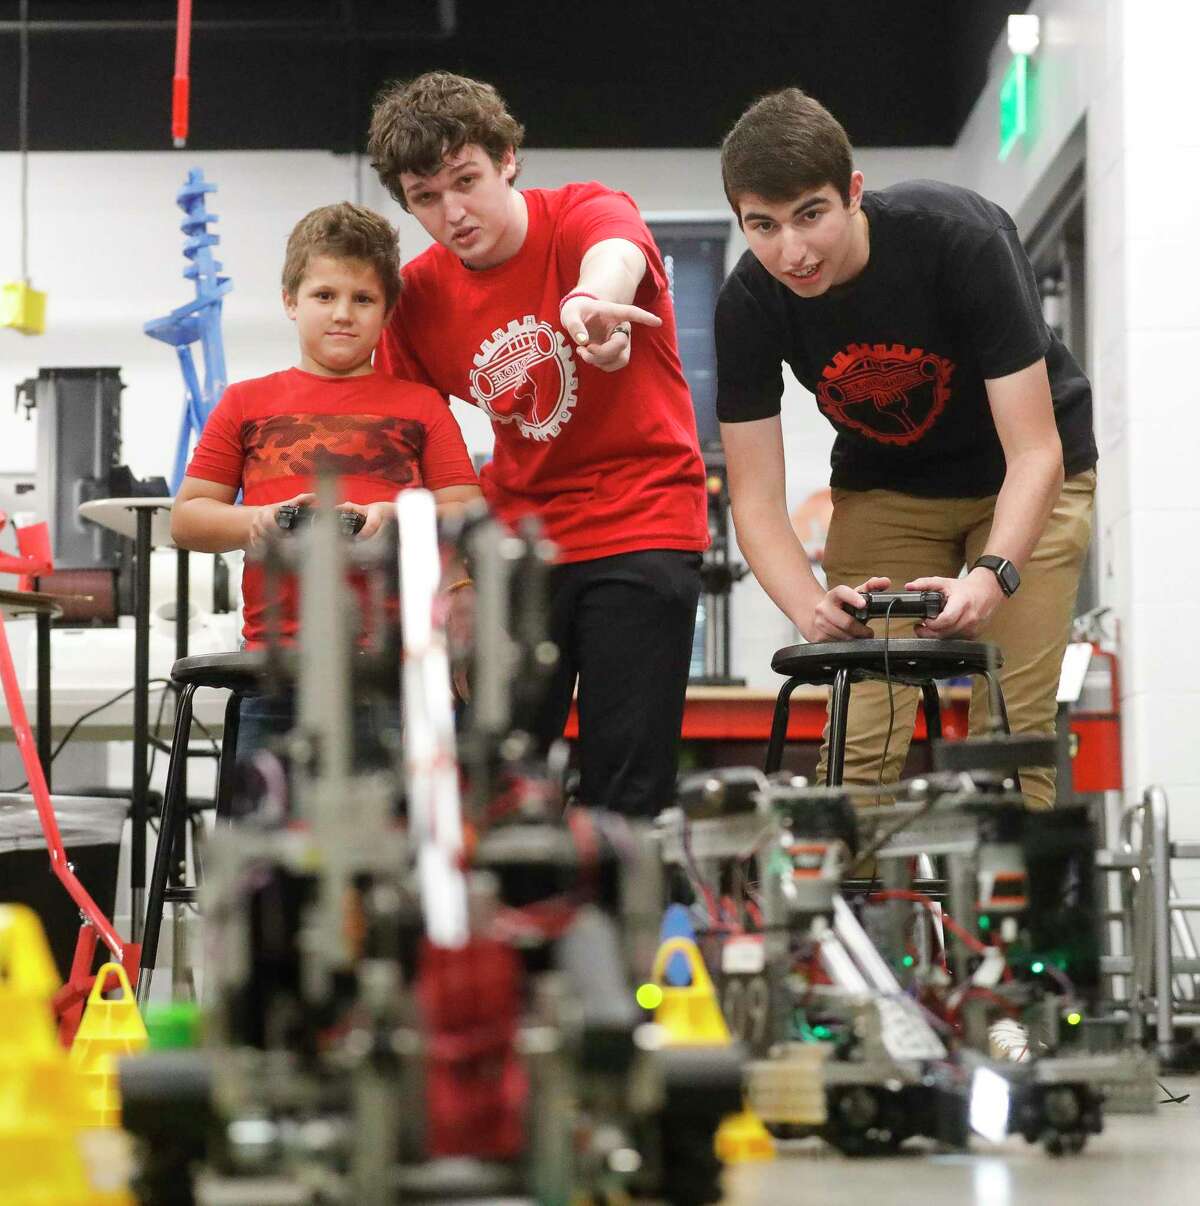 Nicklas De Tirro, center, coaches David Ballard, left, how to control a robot through an obstacle course beside Eric Dunleavy as members of The Woodlands High School’s robotics team hosted 18 students from Powell Elementary School as part of their outreach program, Pastabots Junior, Thursday, May 5, 2022, in The Woodlands. The after school program for elementary students, run by the TWHS robotics team, gives young students exposure to science and technology lesson and experiments.